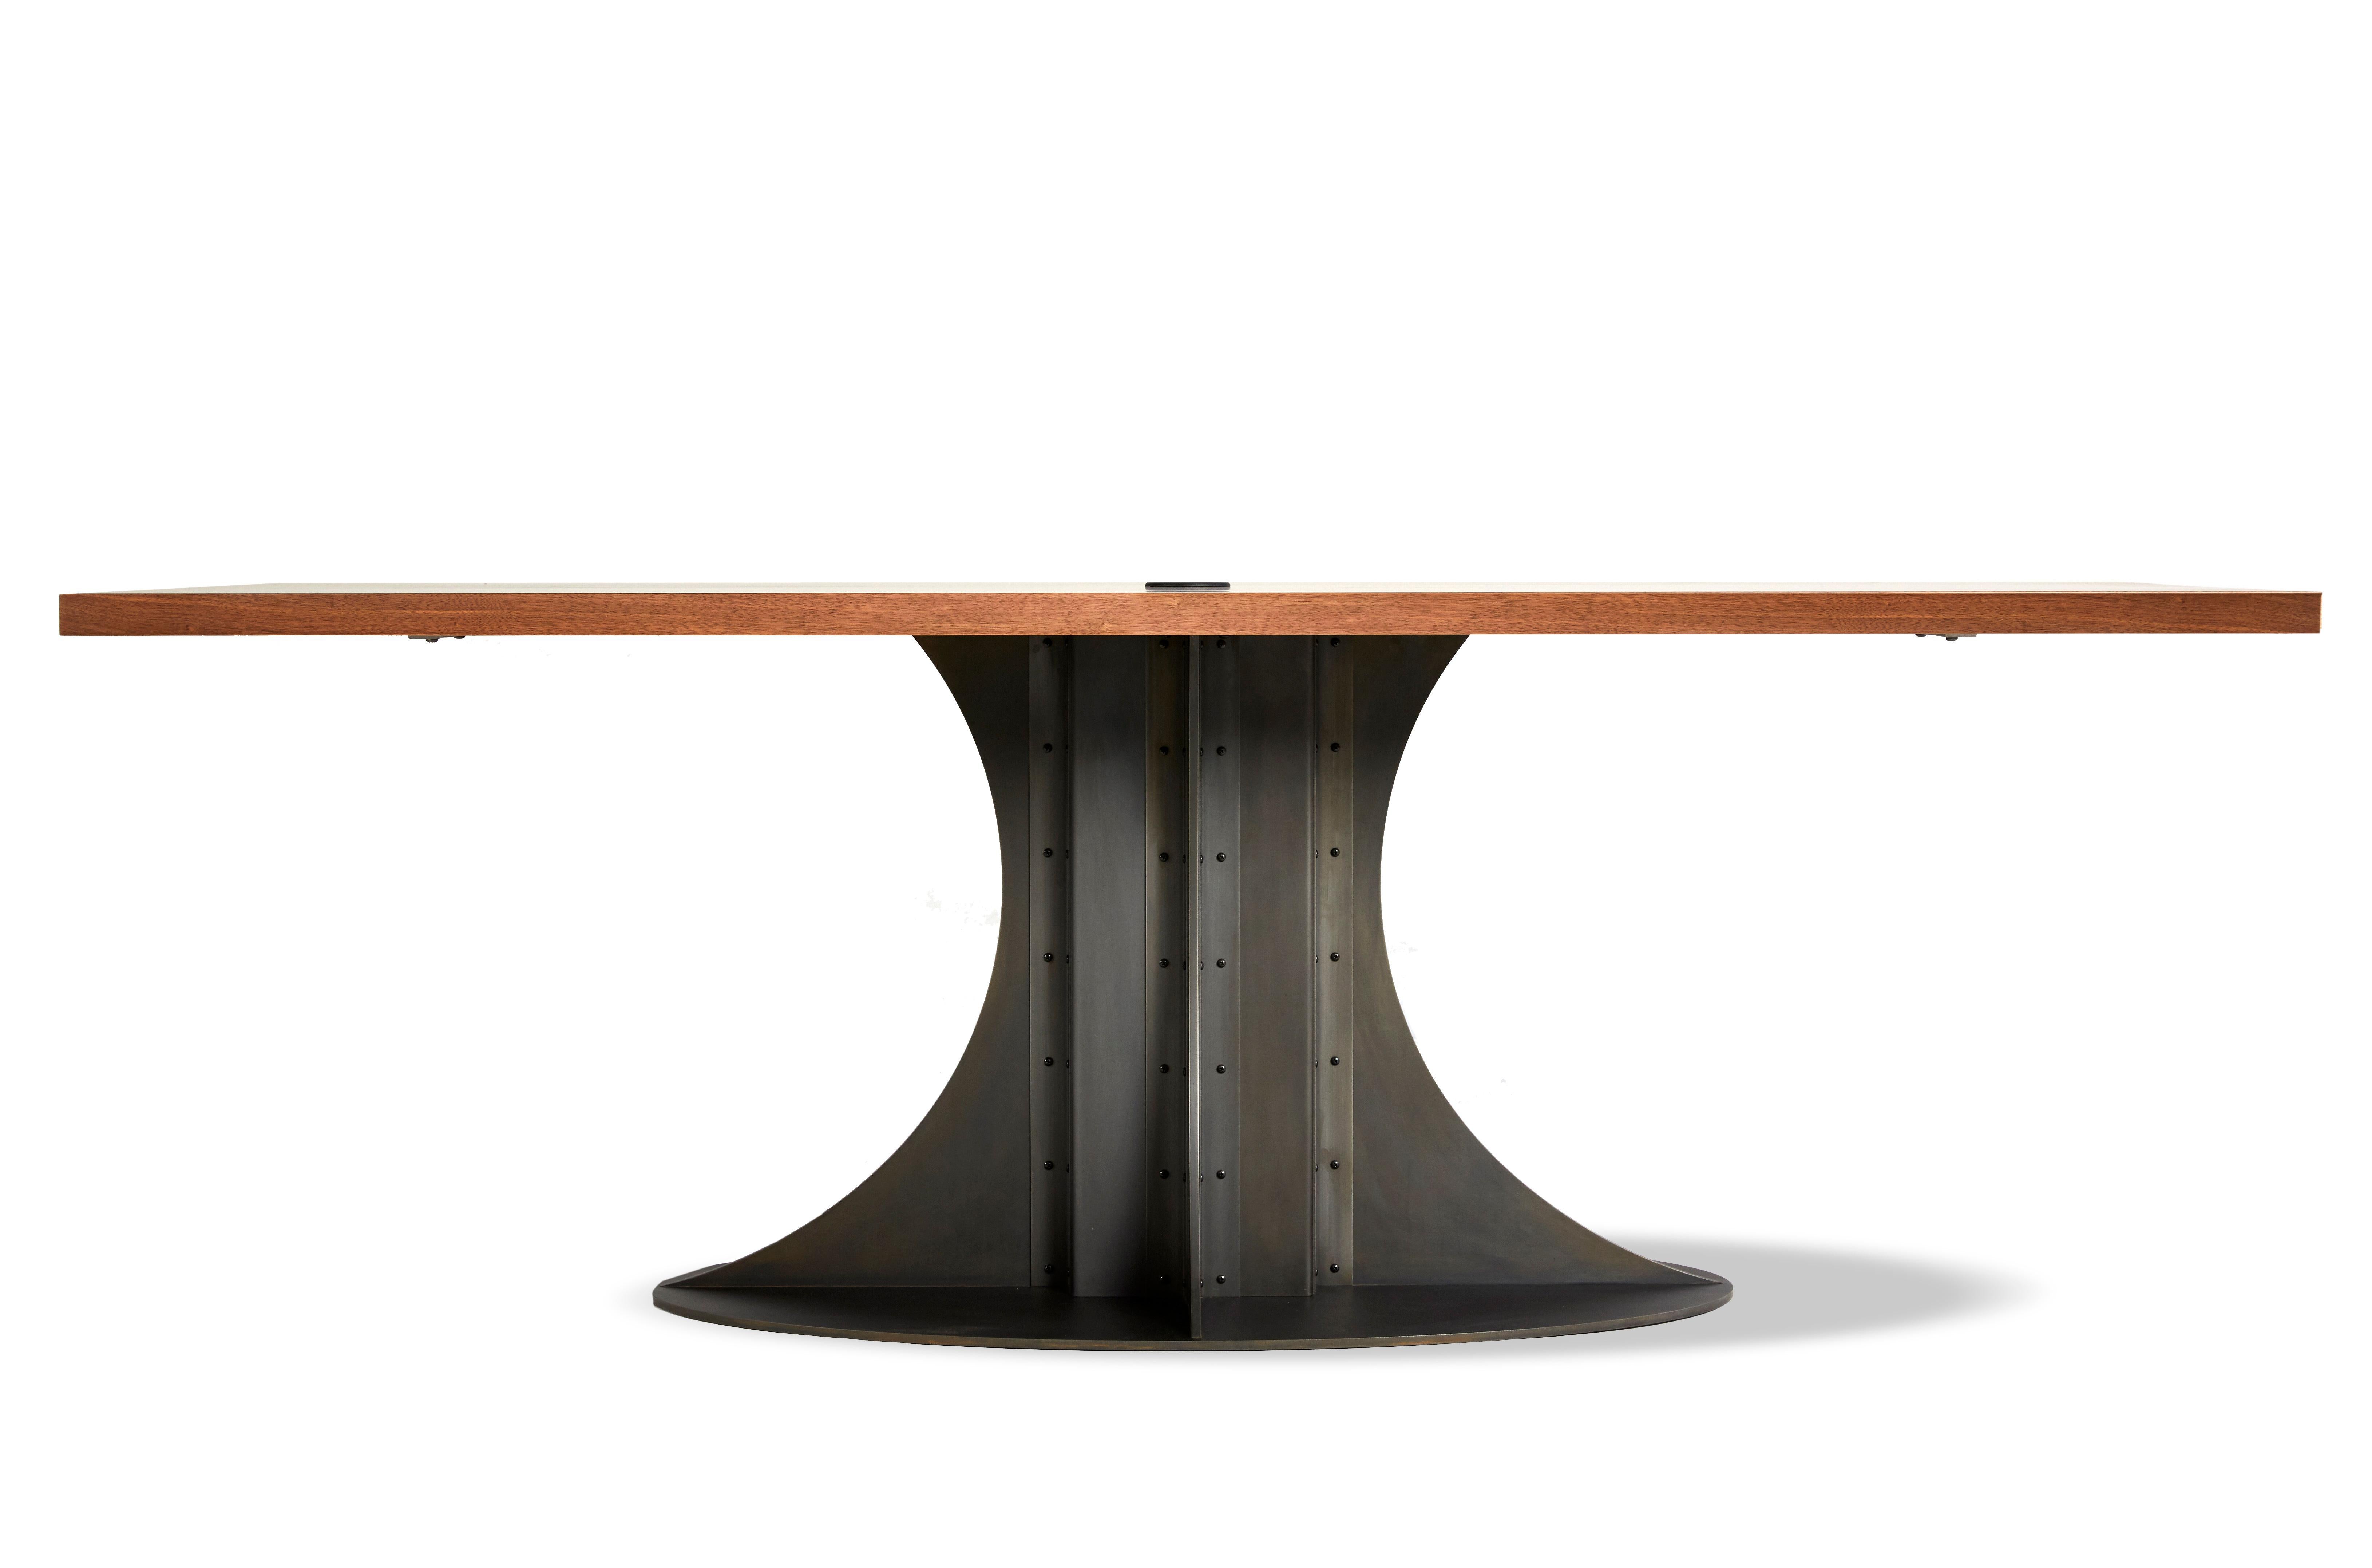 The Empire pedestal table is a powerful addition to the Mark Jupiter Elegant Industrial collection. With a massive center pedestal inspired by the spire cap of the Empire State Building this solid Walnut and blackened steel table will not only be a